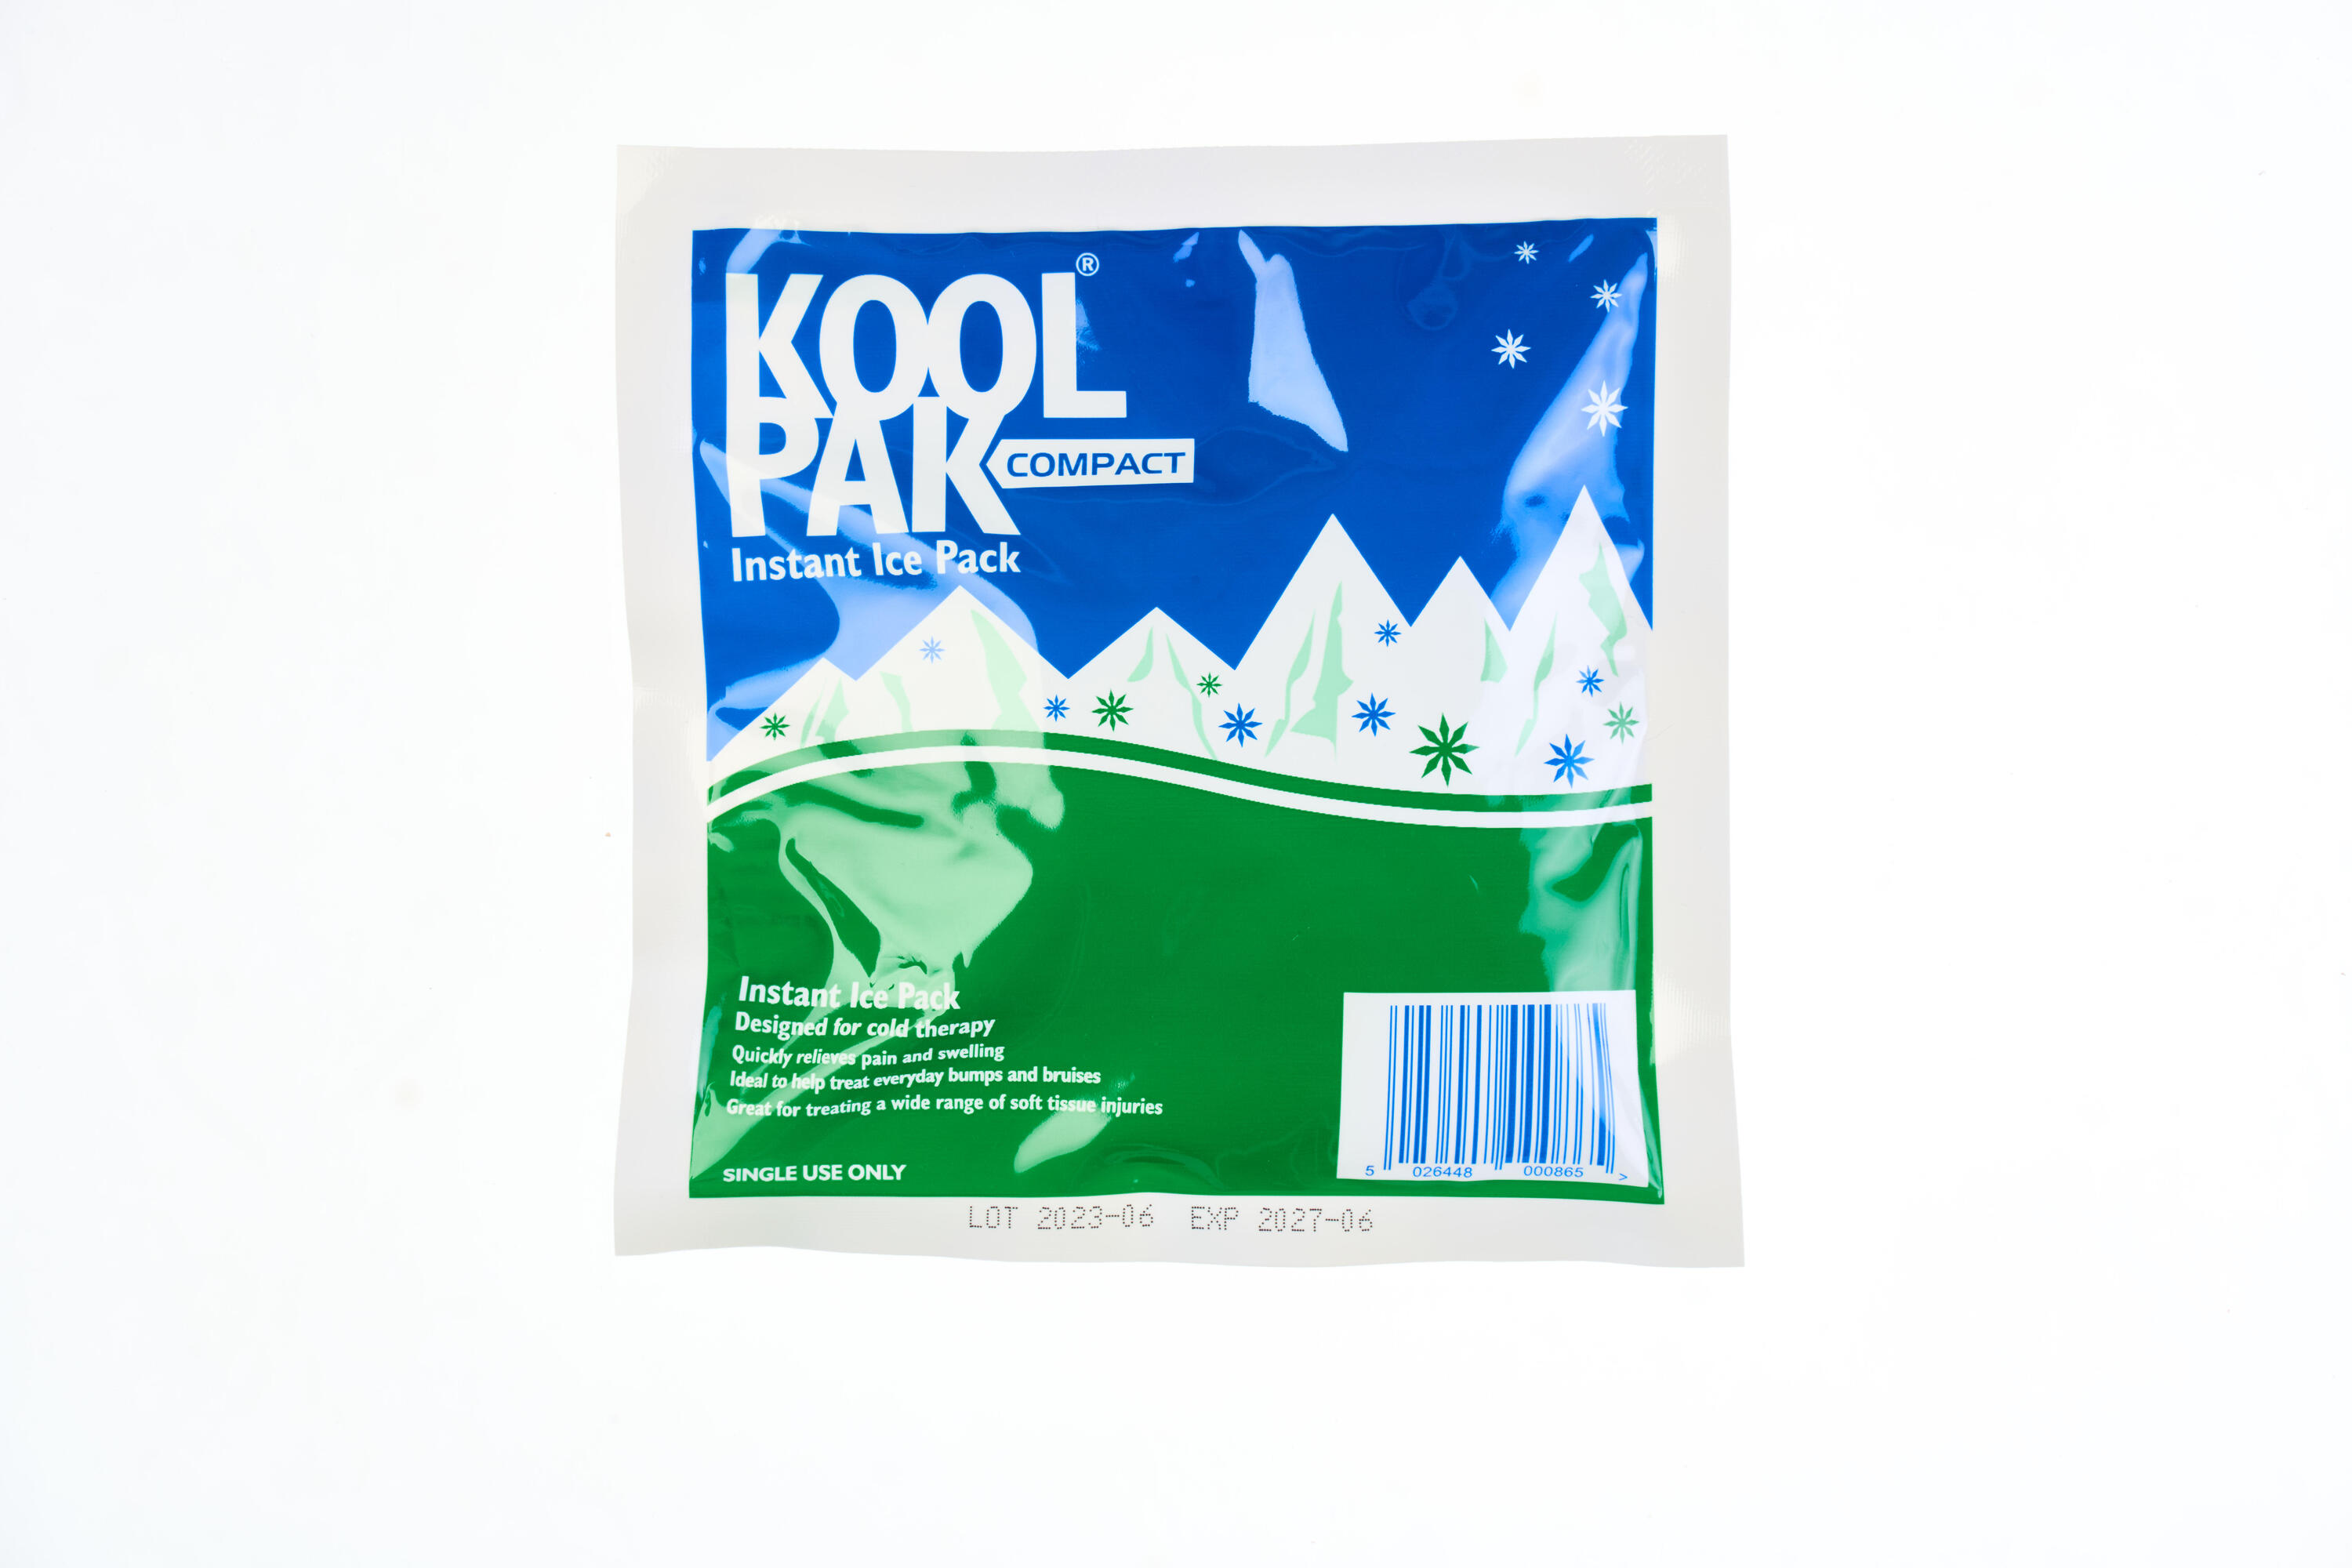 Koolpak Compact Instant Ice Pack - 15 x 15cm - Pack of 80 1/6